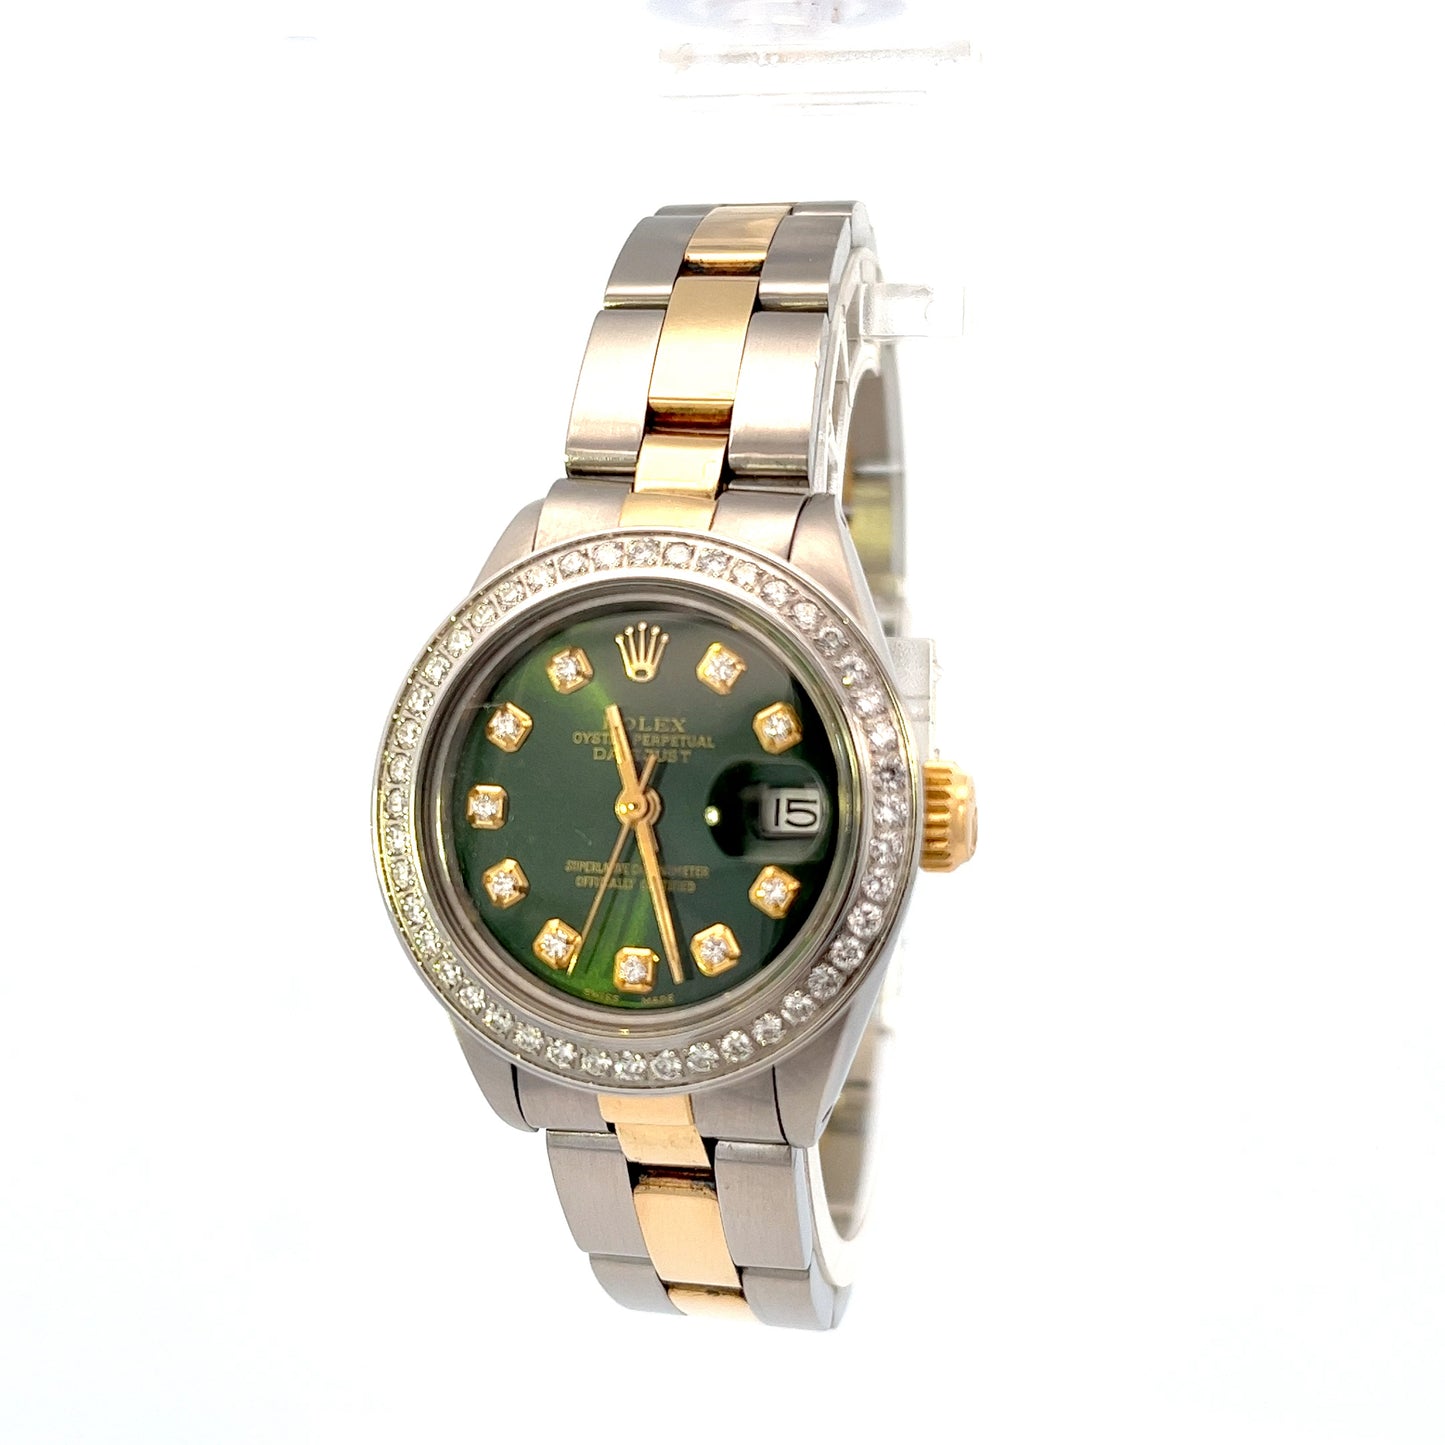 Preowned Rolex stainless steel and gold 26mm Datejust, Stainless steel and gold oyster band, green diamond dial, diamond bezel